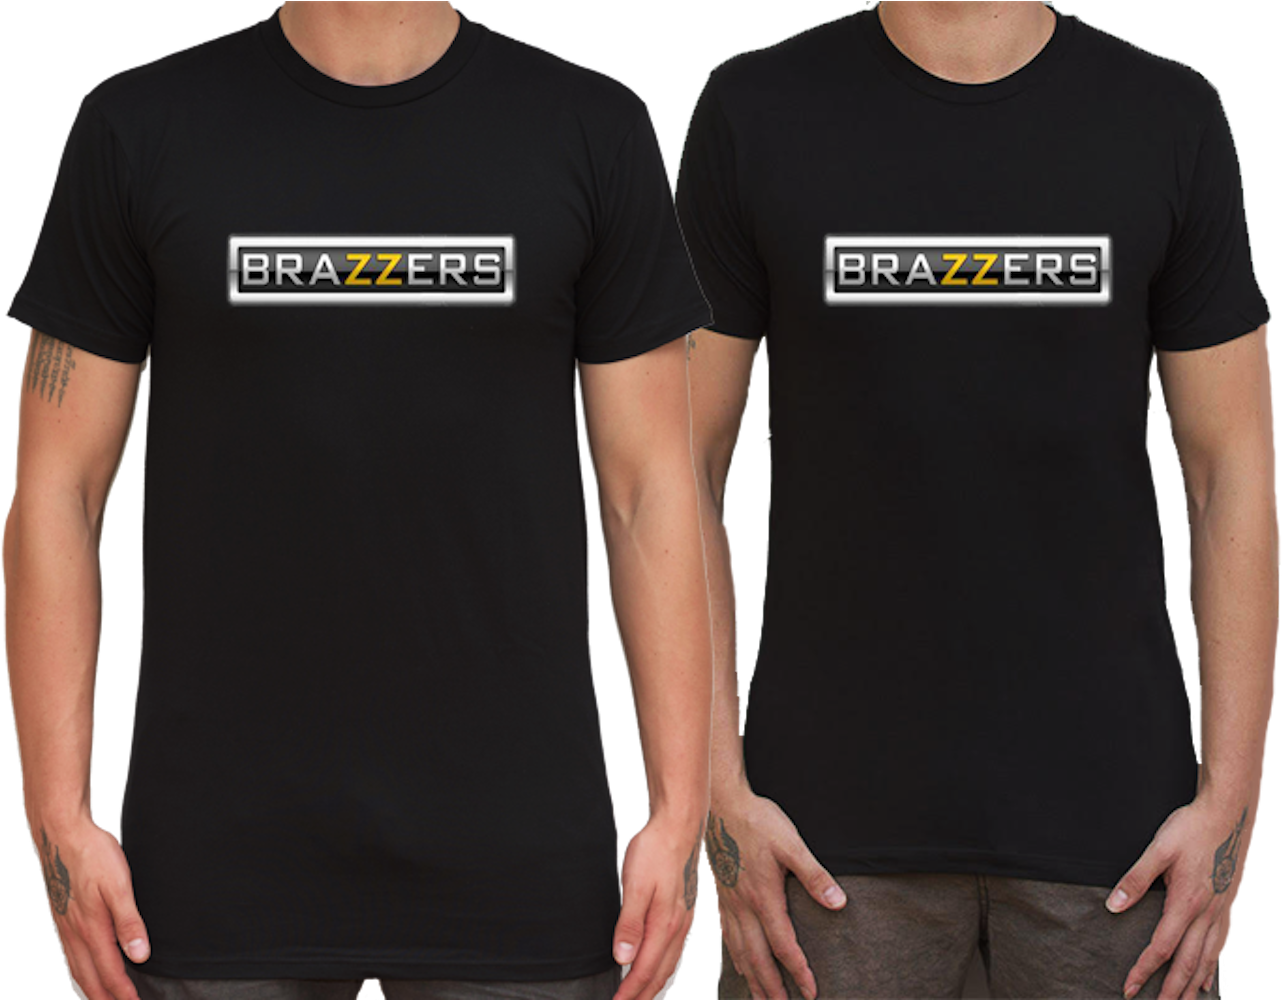 Download Brazzers Black Brazzers T Shirt Png Png Image With No Background 